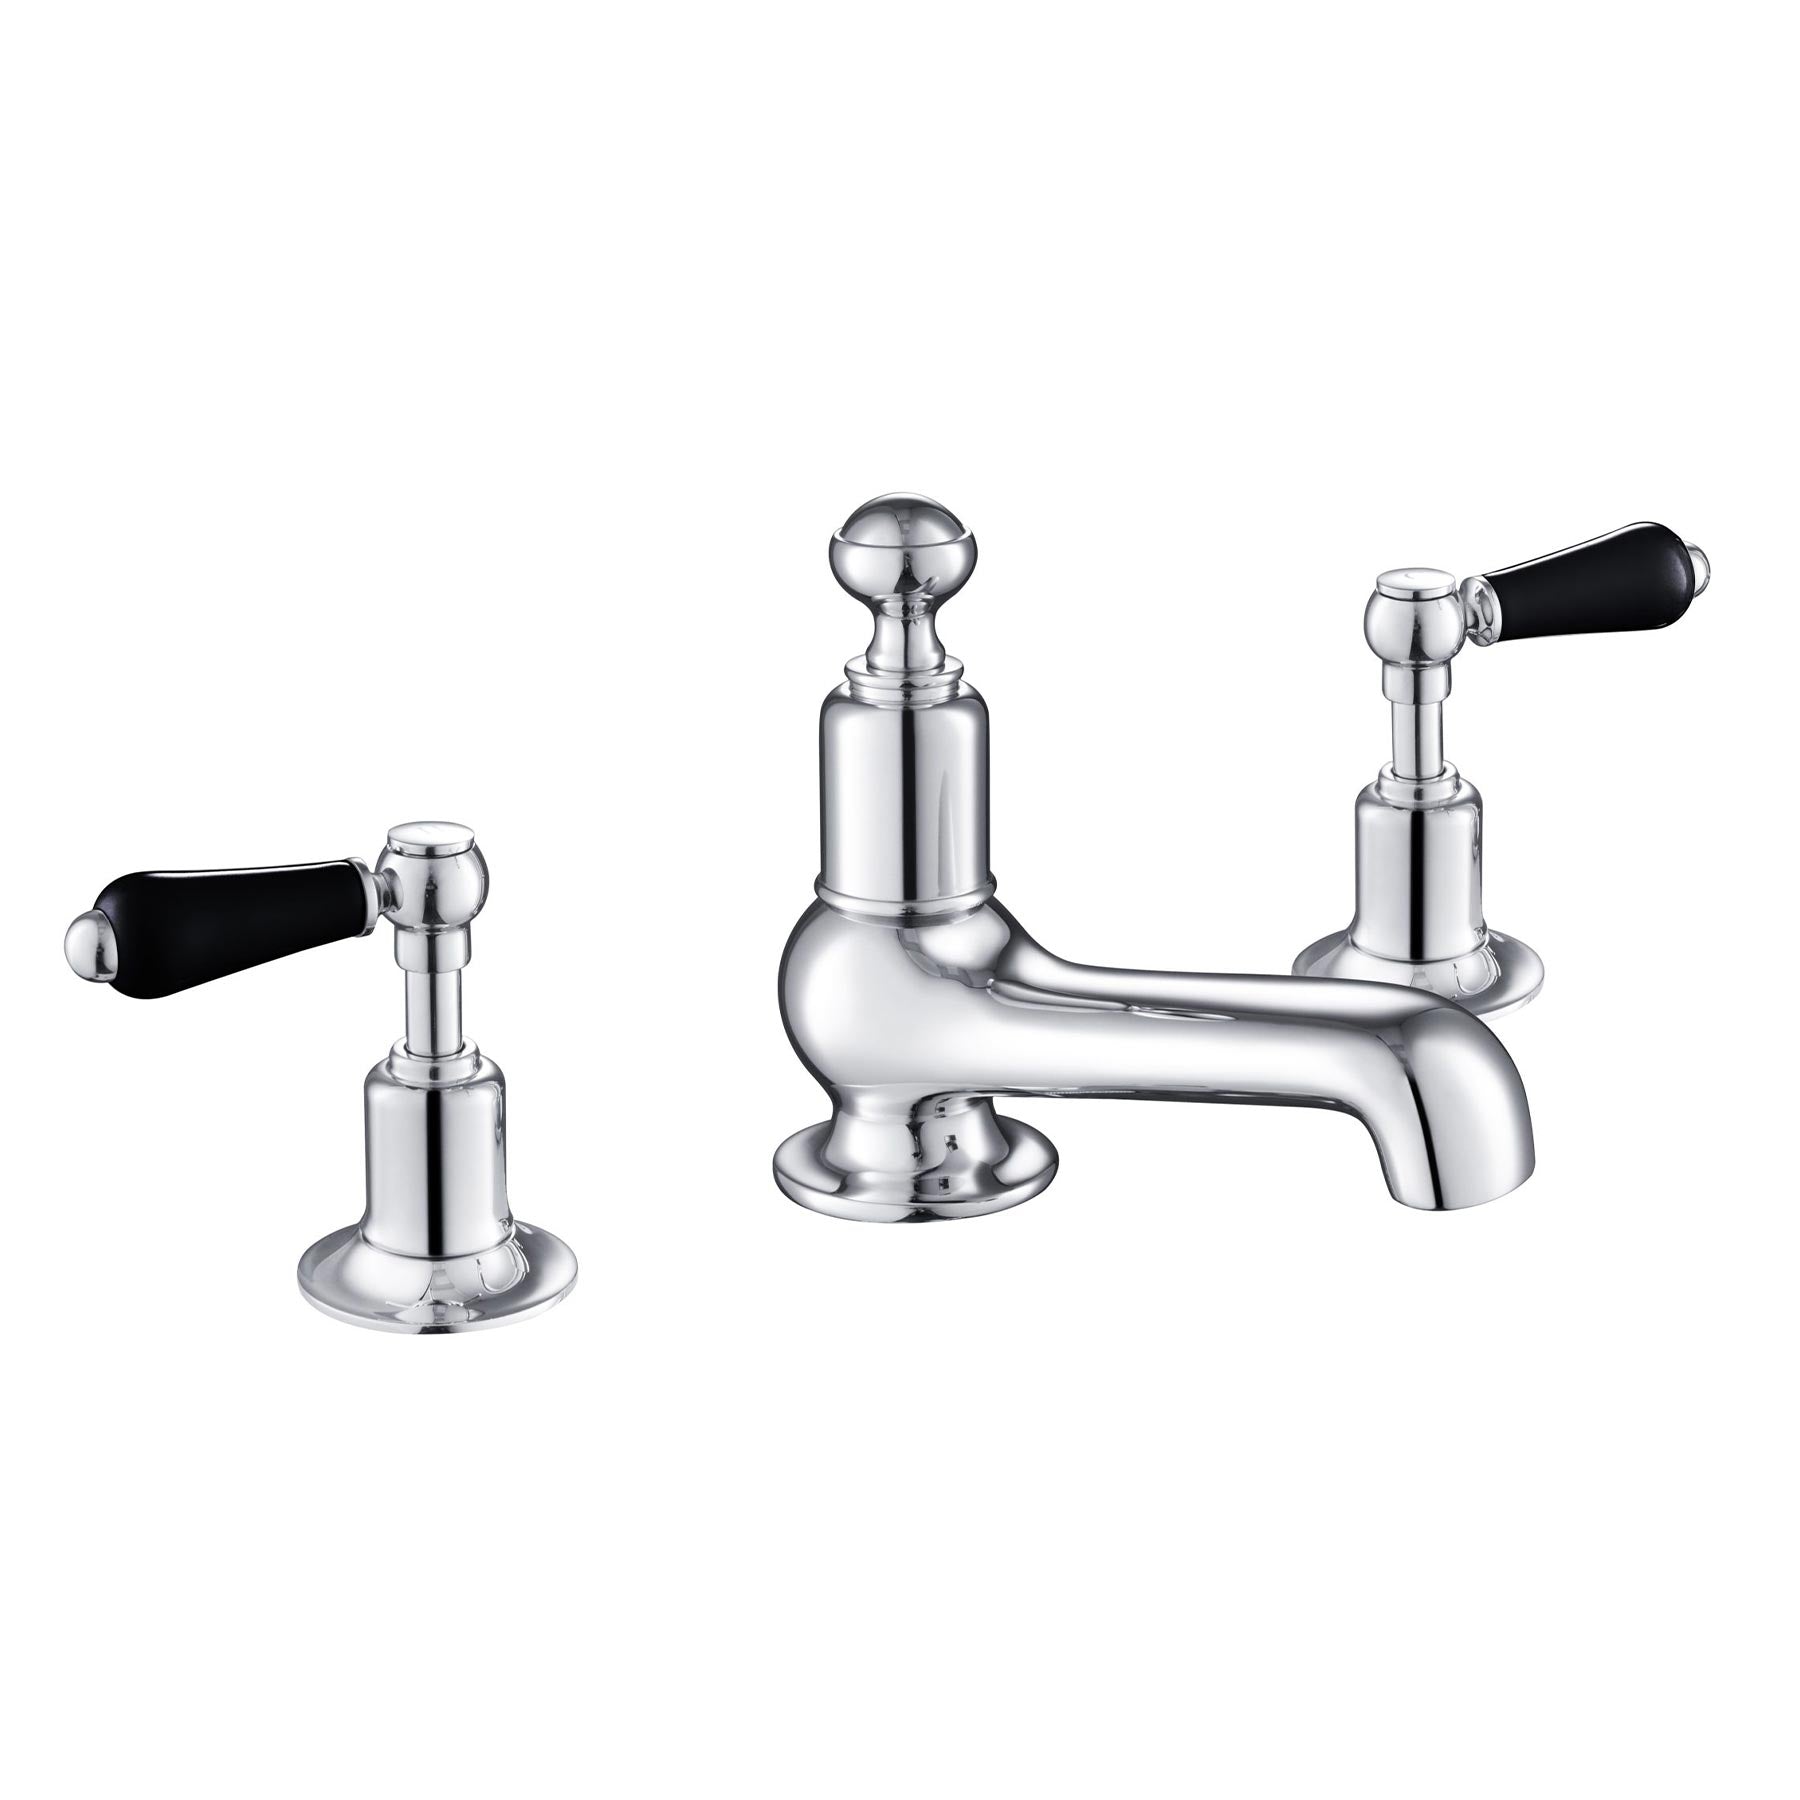 Chester Black Lever 3 Hole Deck Mounted Basin Mixer. Designed with tradition in mind, this three-part tap has a central spout to deliver water at the perfect temperature due to the thermostatic controls.